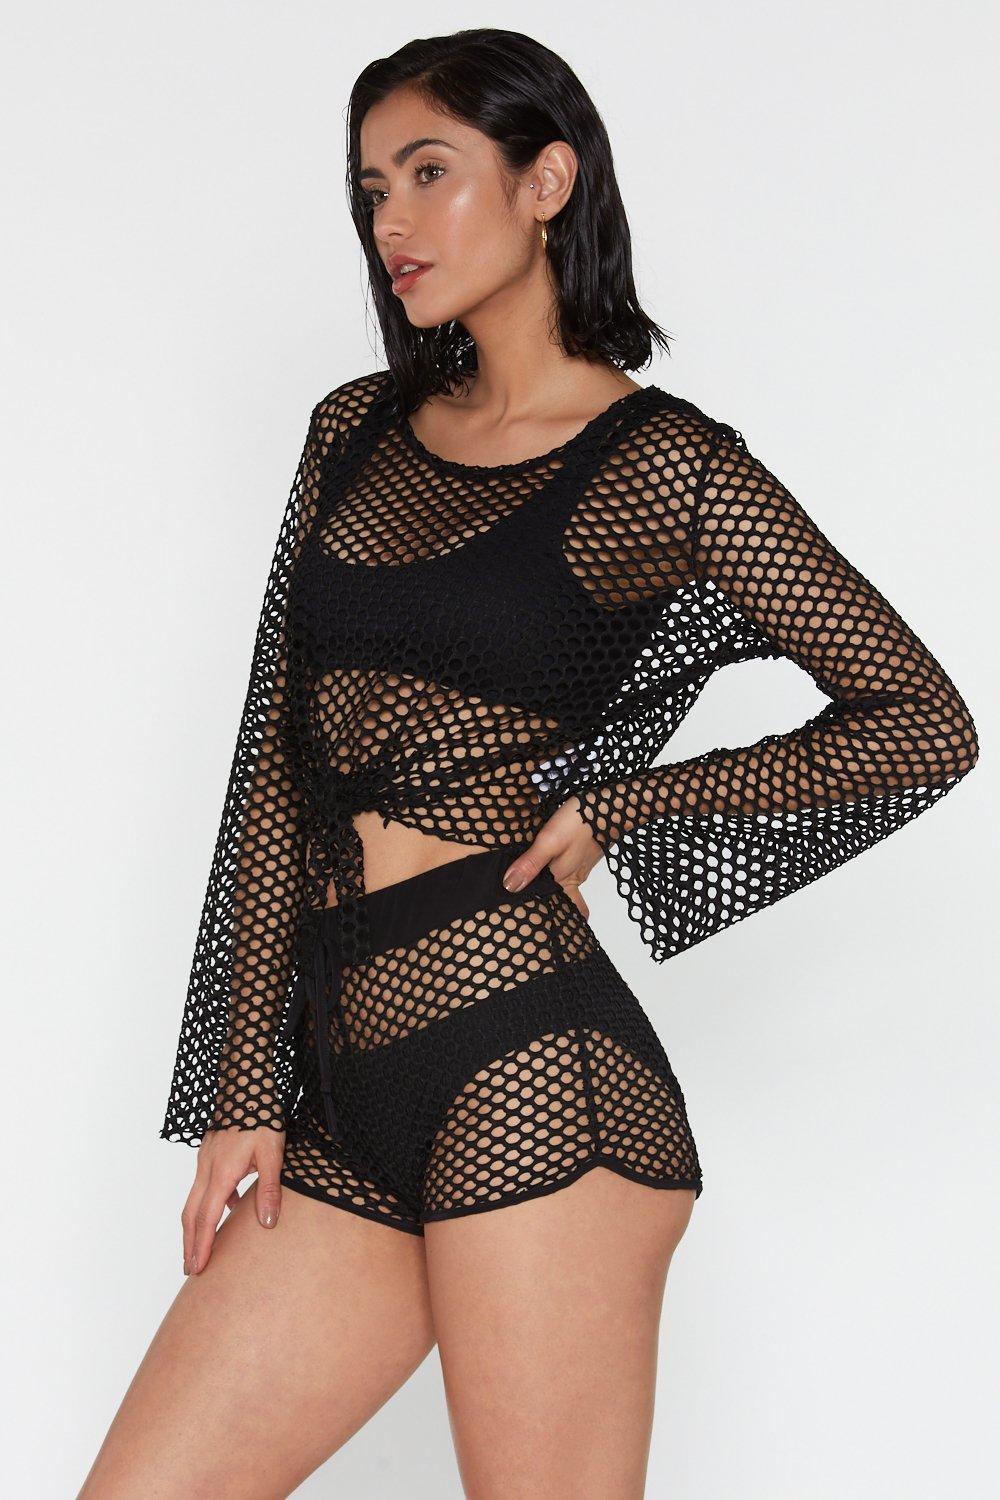 Newcotte 4 Pcs Fishnet Shorts High Waisted Mesh Short Leggings See Through  Fishnet Tights Cover up Shorts for Women